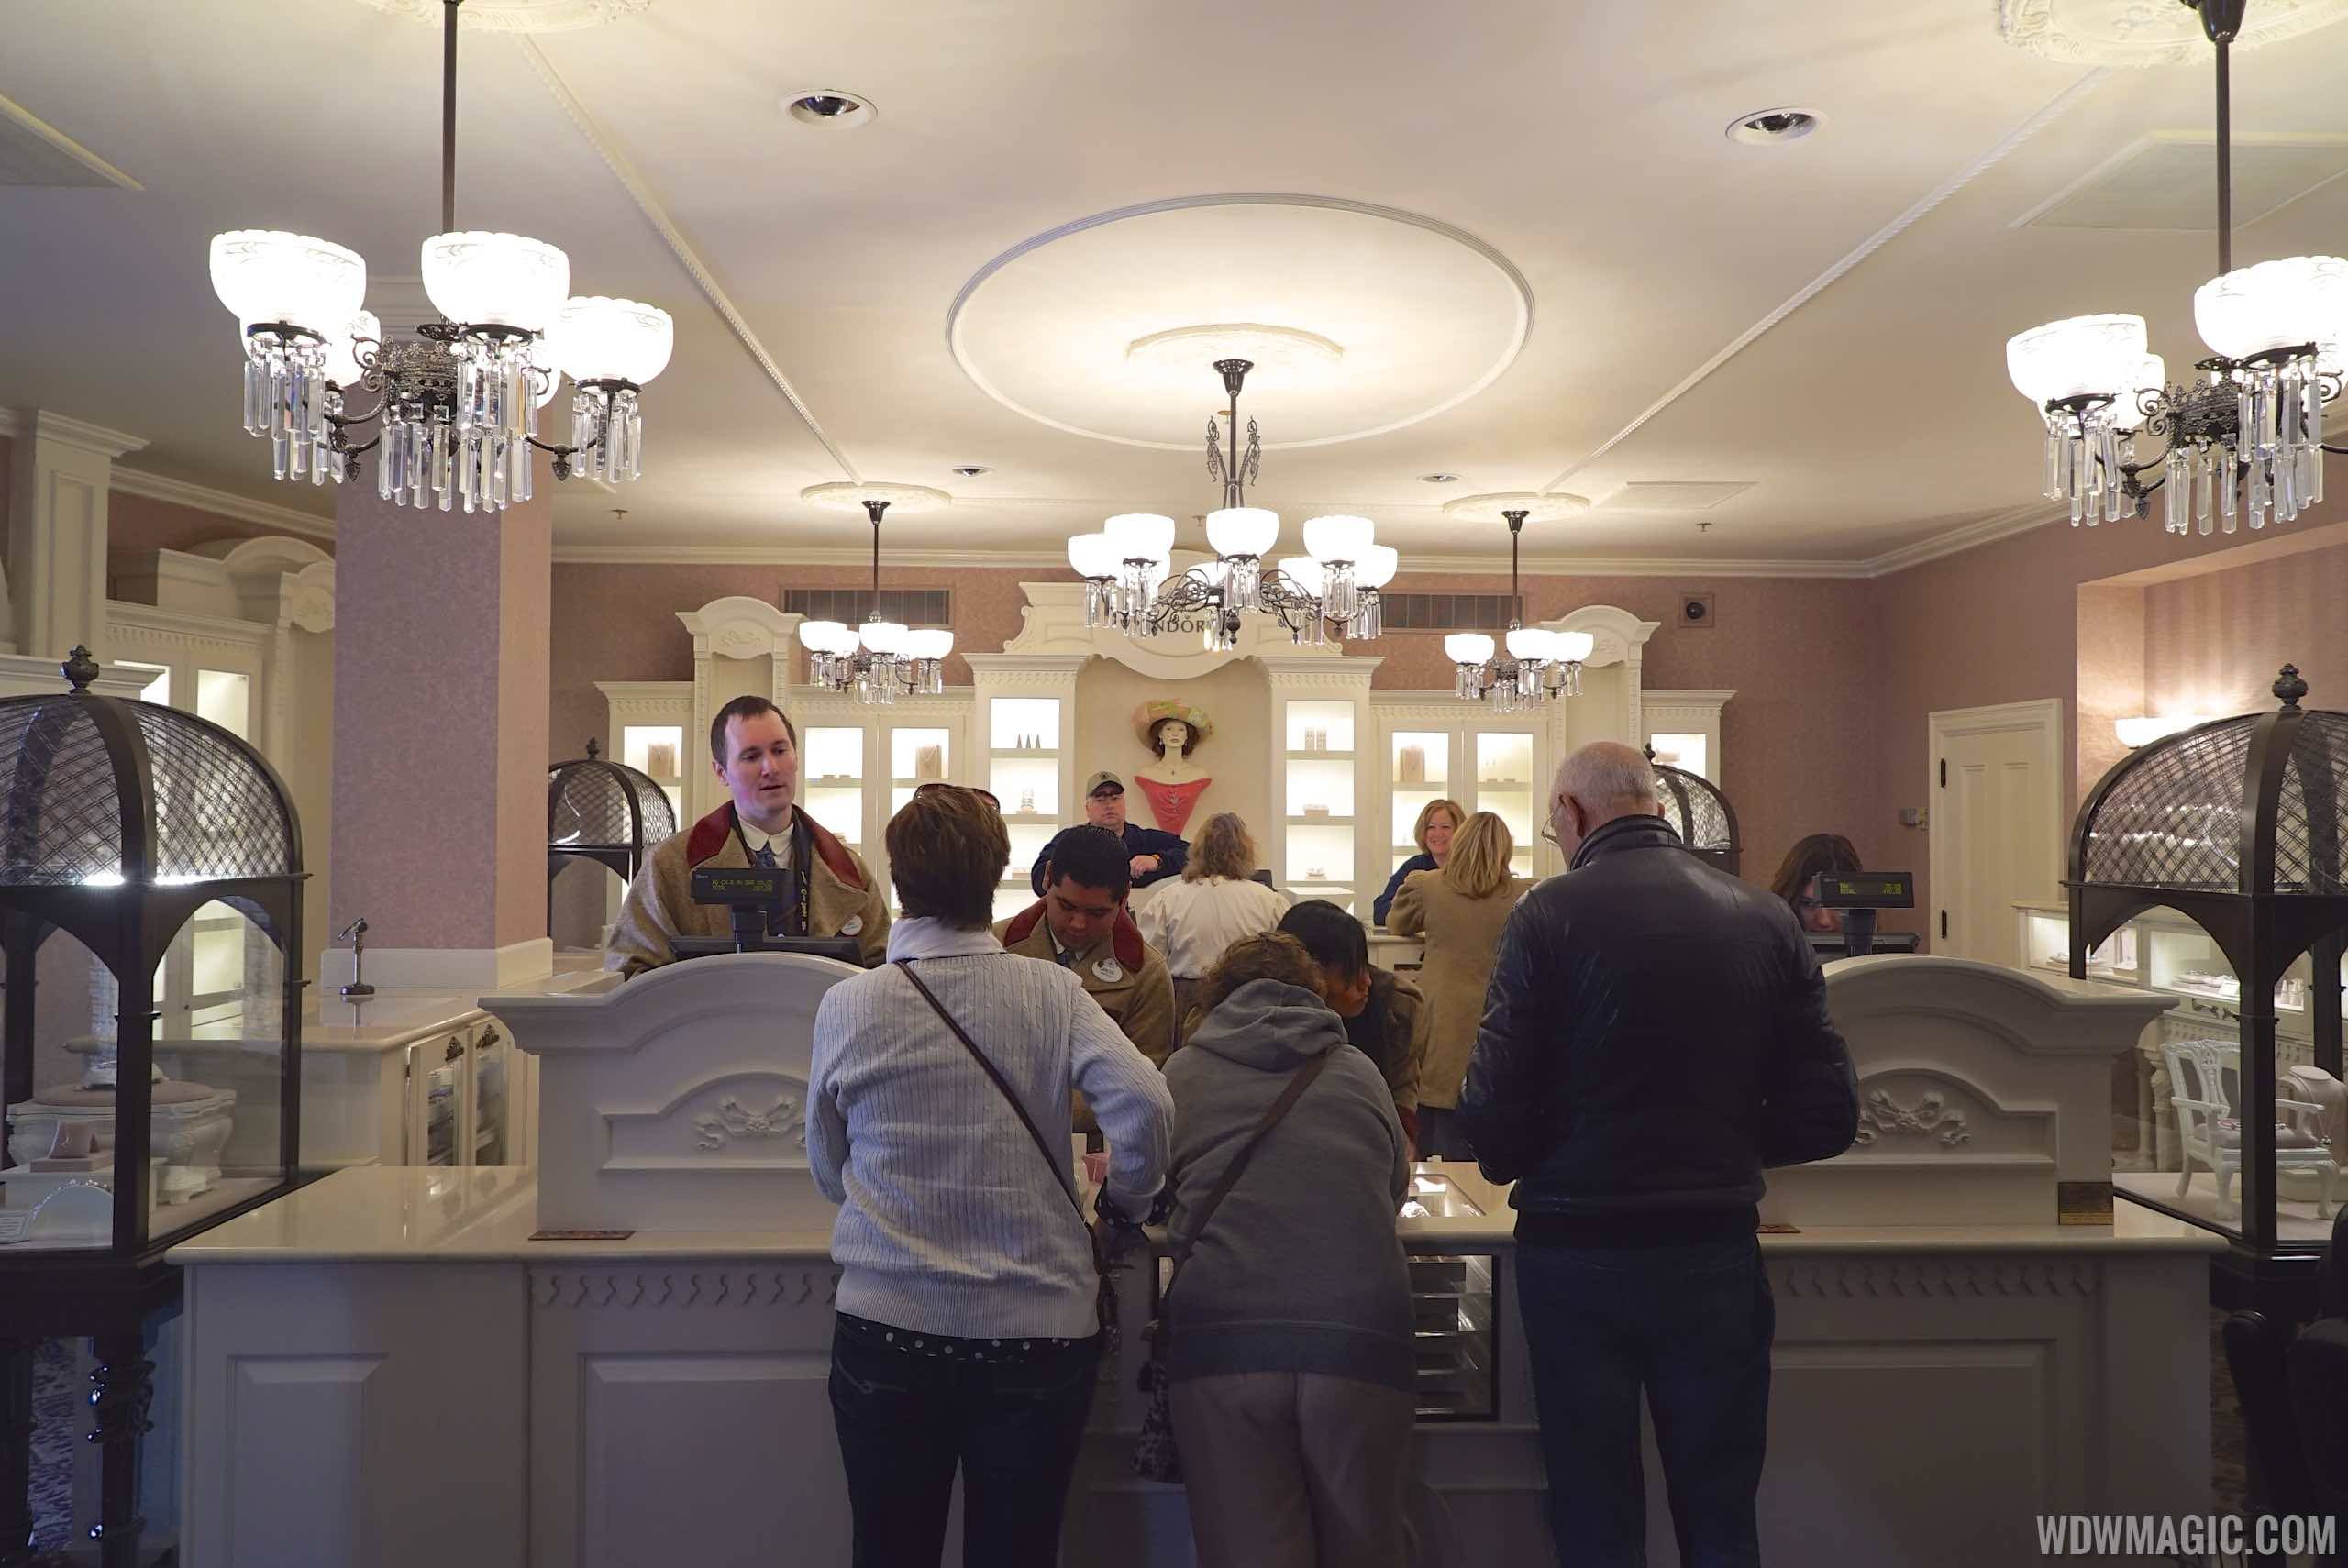 PHOTOS - PANDORA expands its presence in the Magic Kingdom at Uptown Jewelers